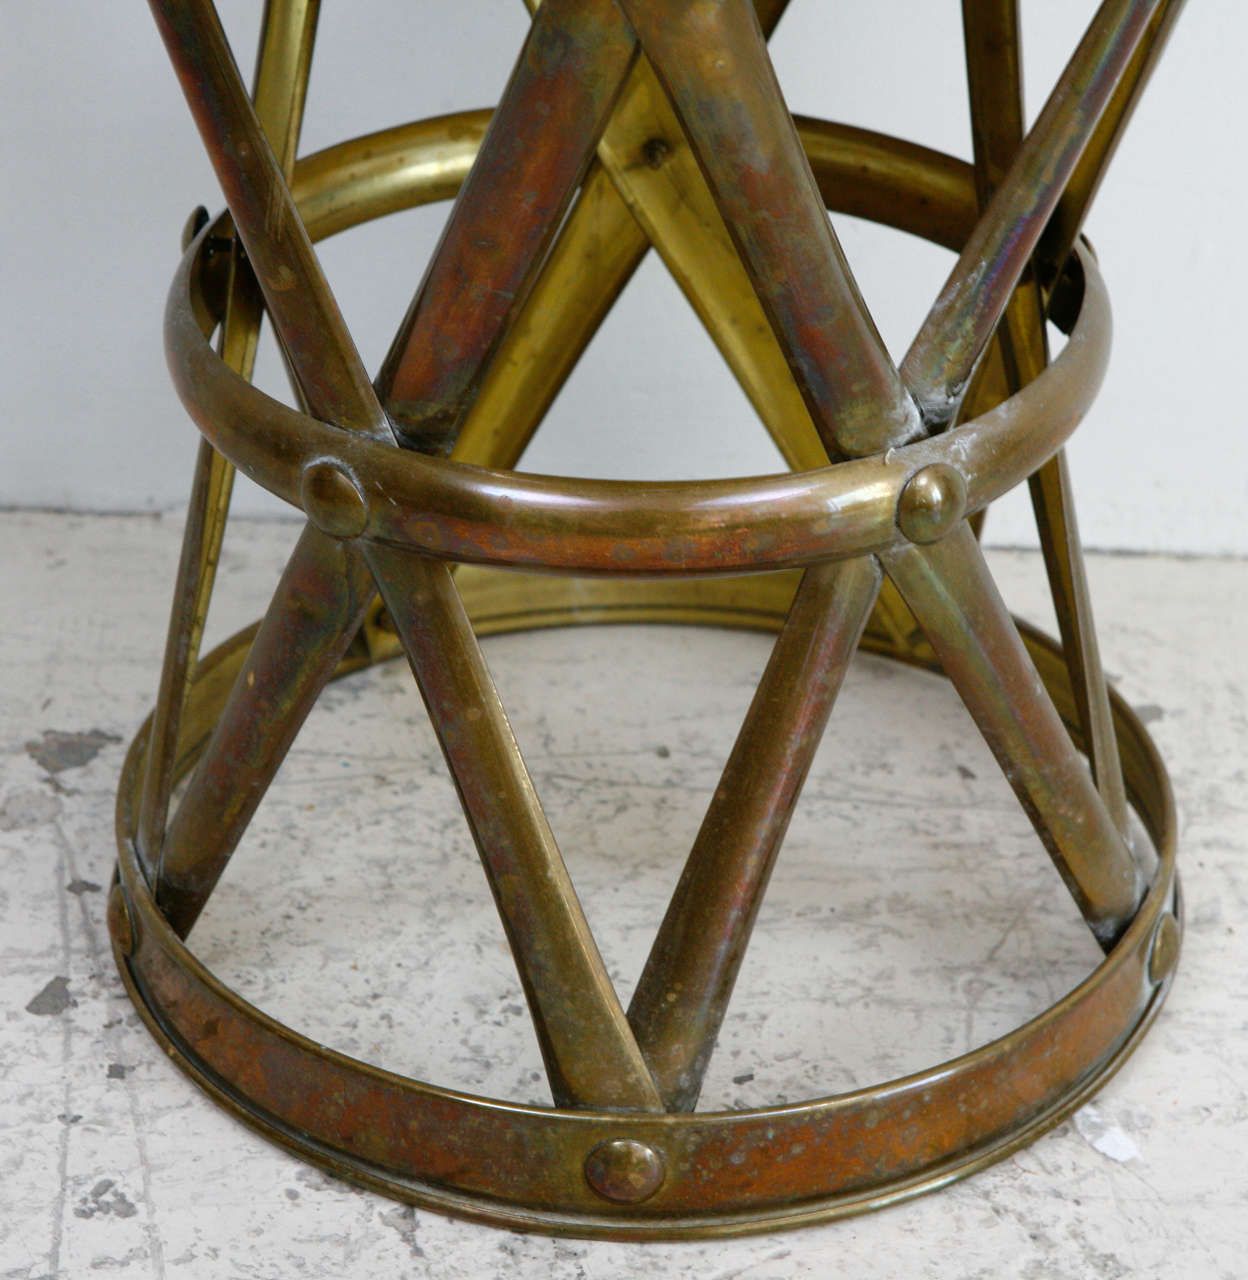 2018 Espresso Antique Brass Stools In Vintage Brass Drum Stool At 1stdibs (View 9 of 10)